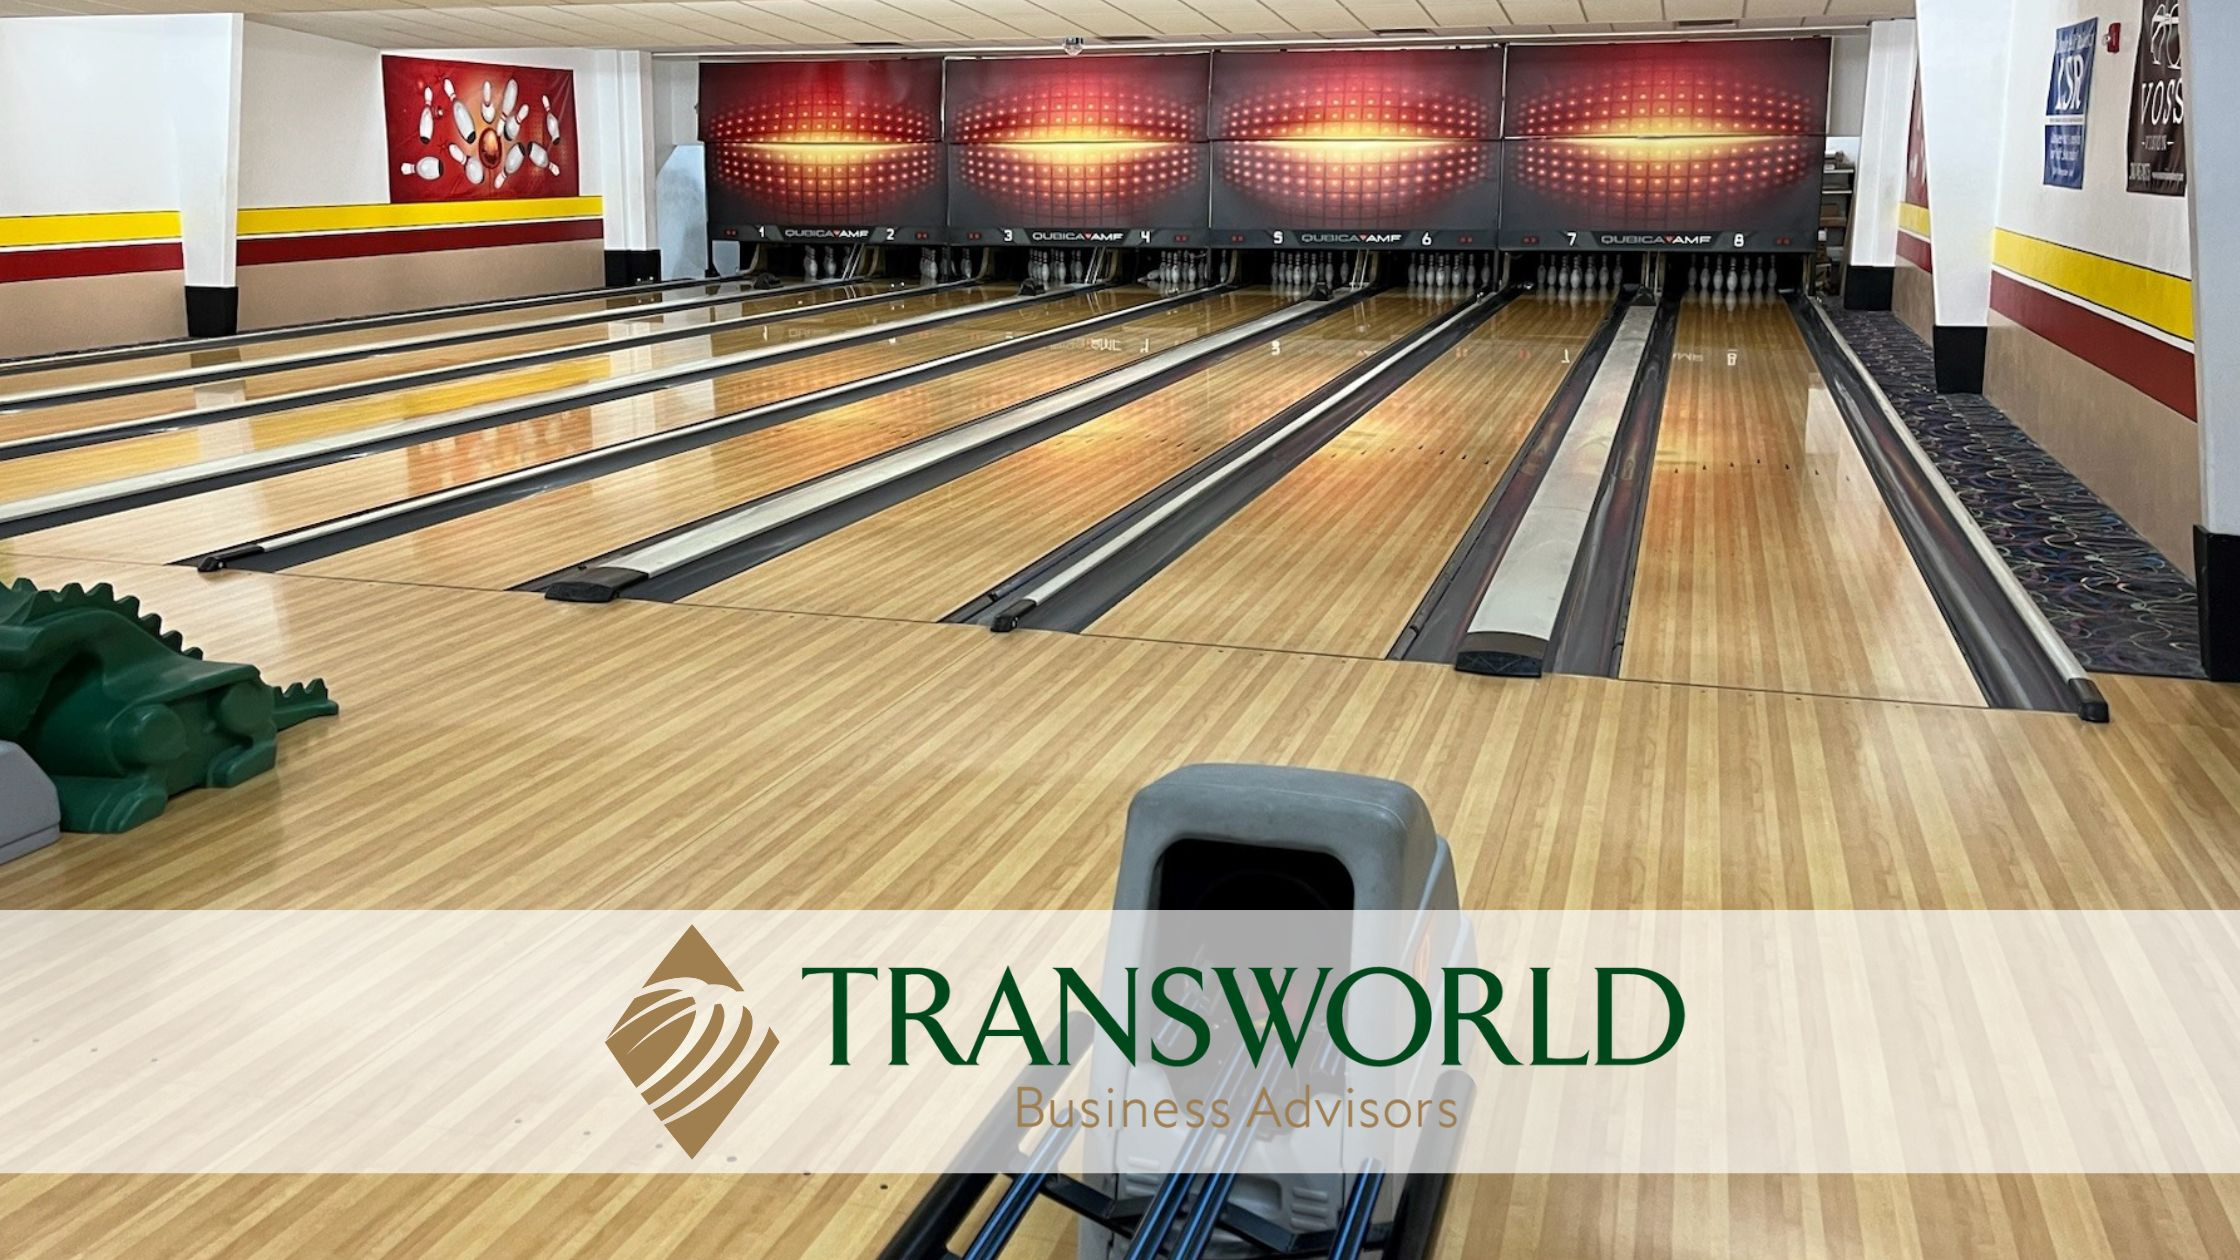 Great Opportunity Bowling Movies and Restaurant Business